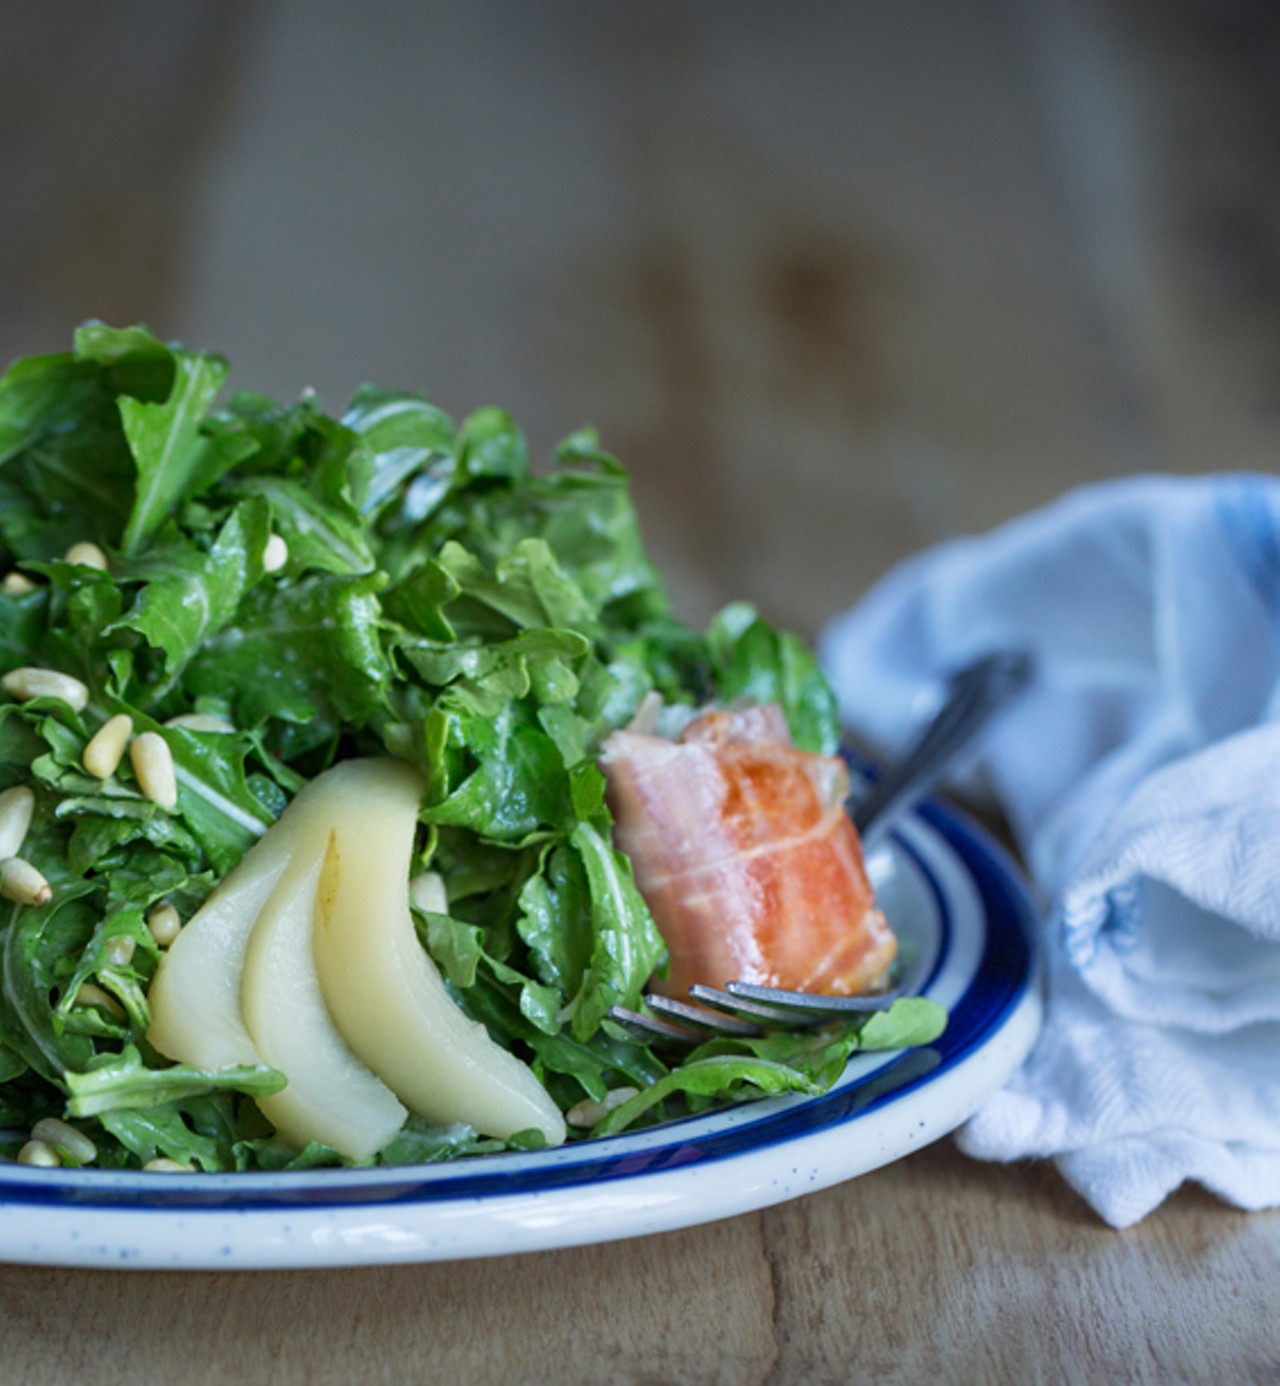 The poached-pear salad is arugula topped with goat cheese, prosciutto, pine nuts, pear vinaigrette and cinnamon.